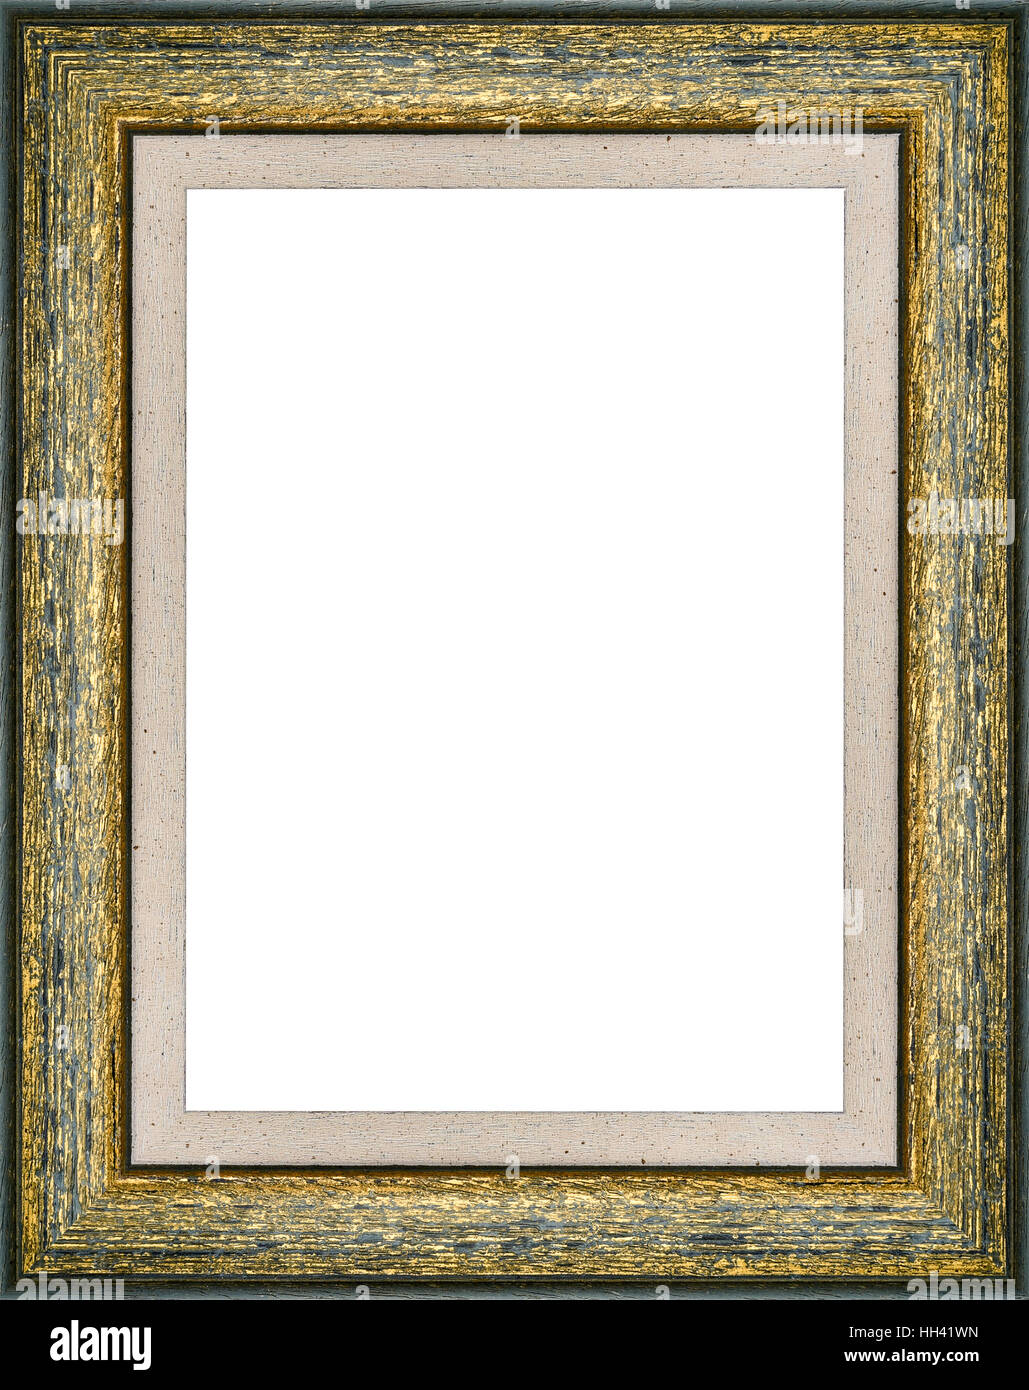 Wooden green vintage picture frame isolated on white background. High resolution photo. Stock Photo